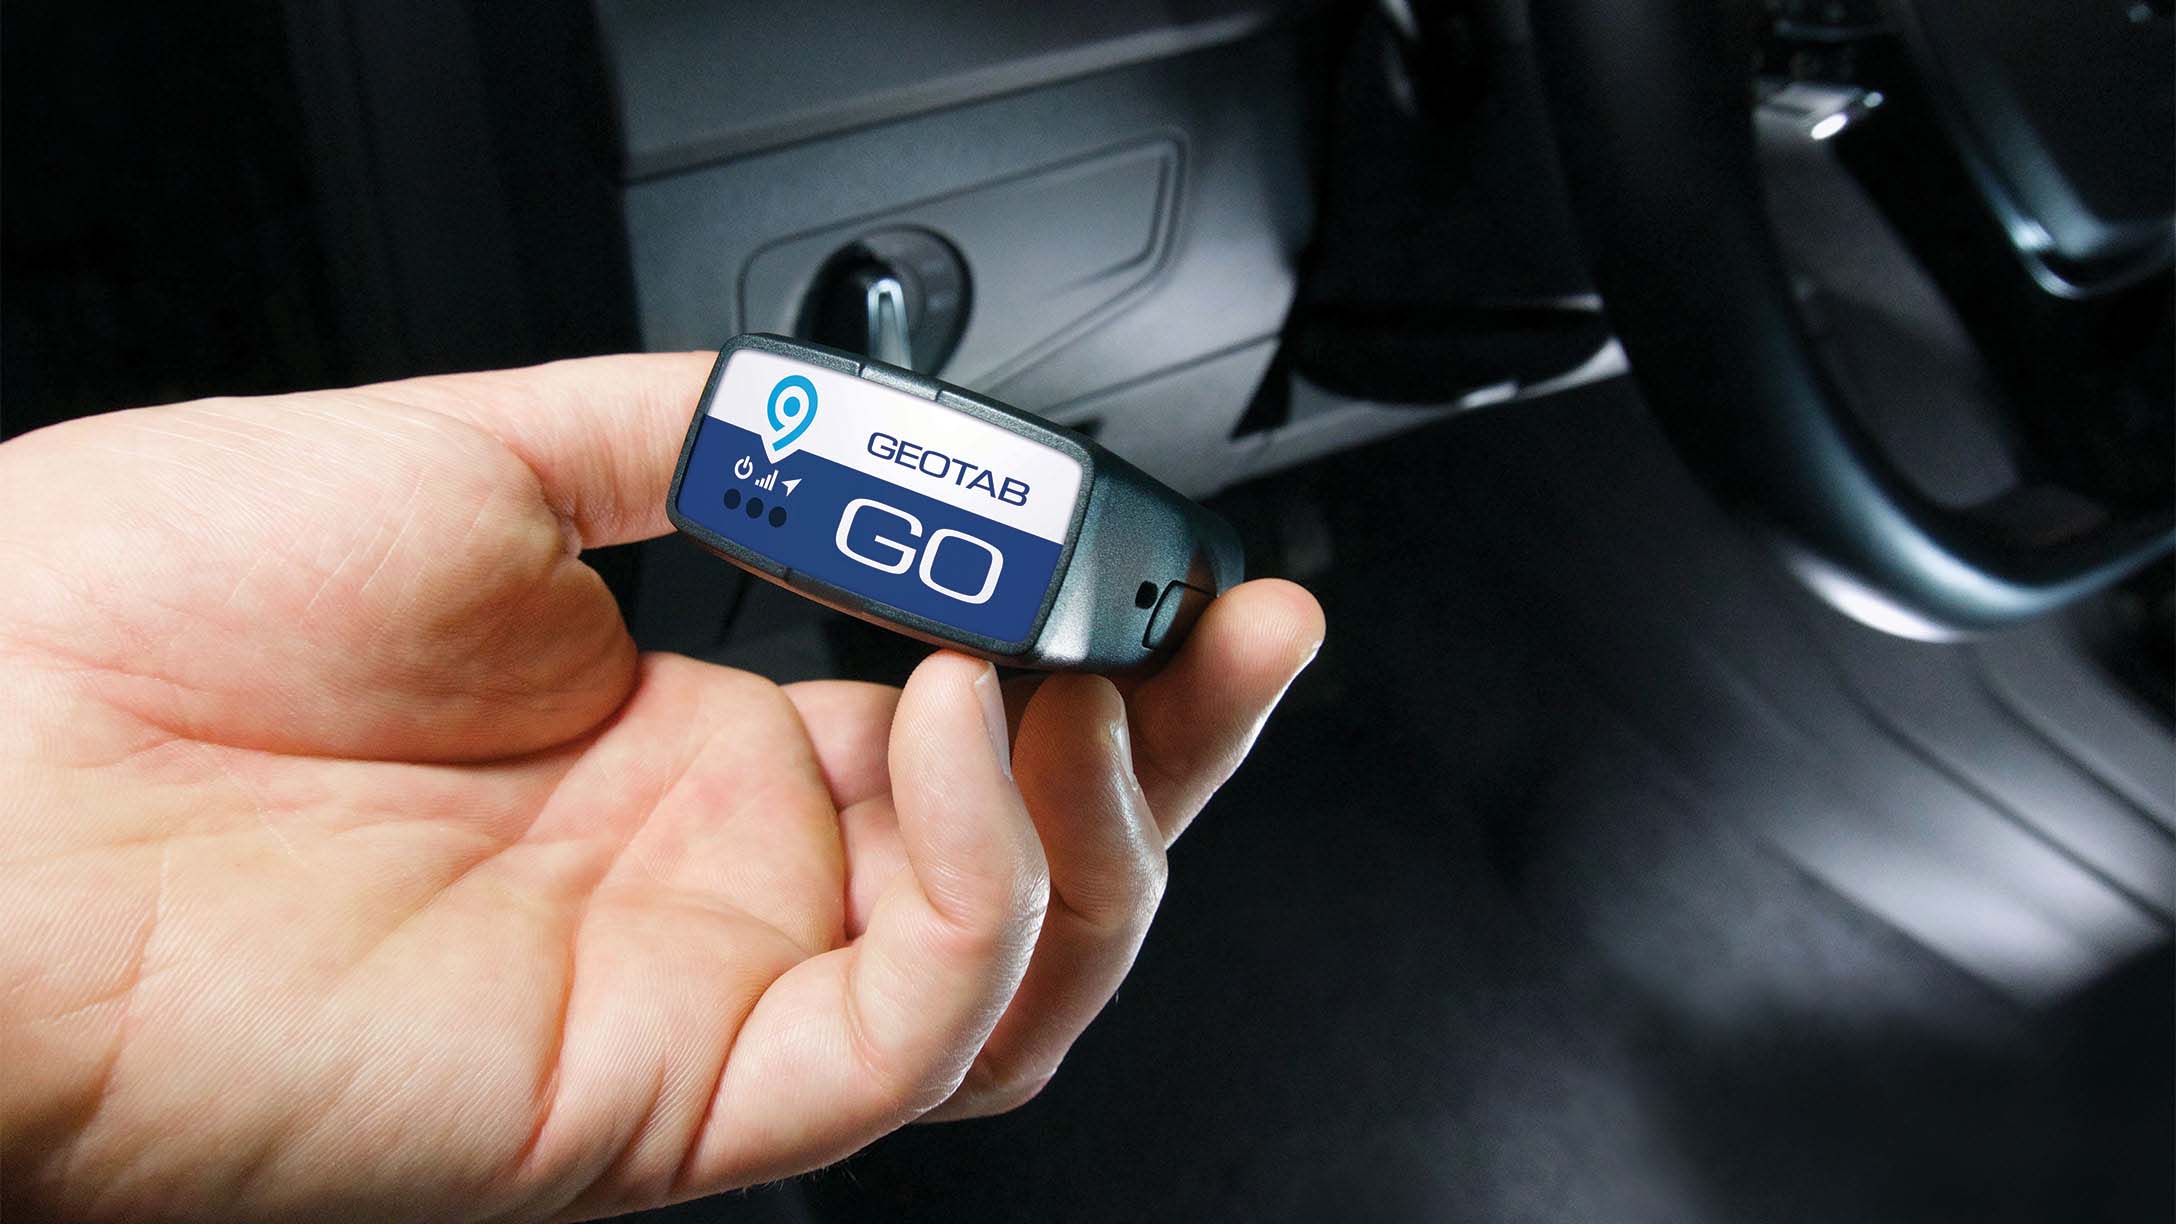 Hand holding Geotab GO device with vehicle dashboard in the background